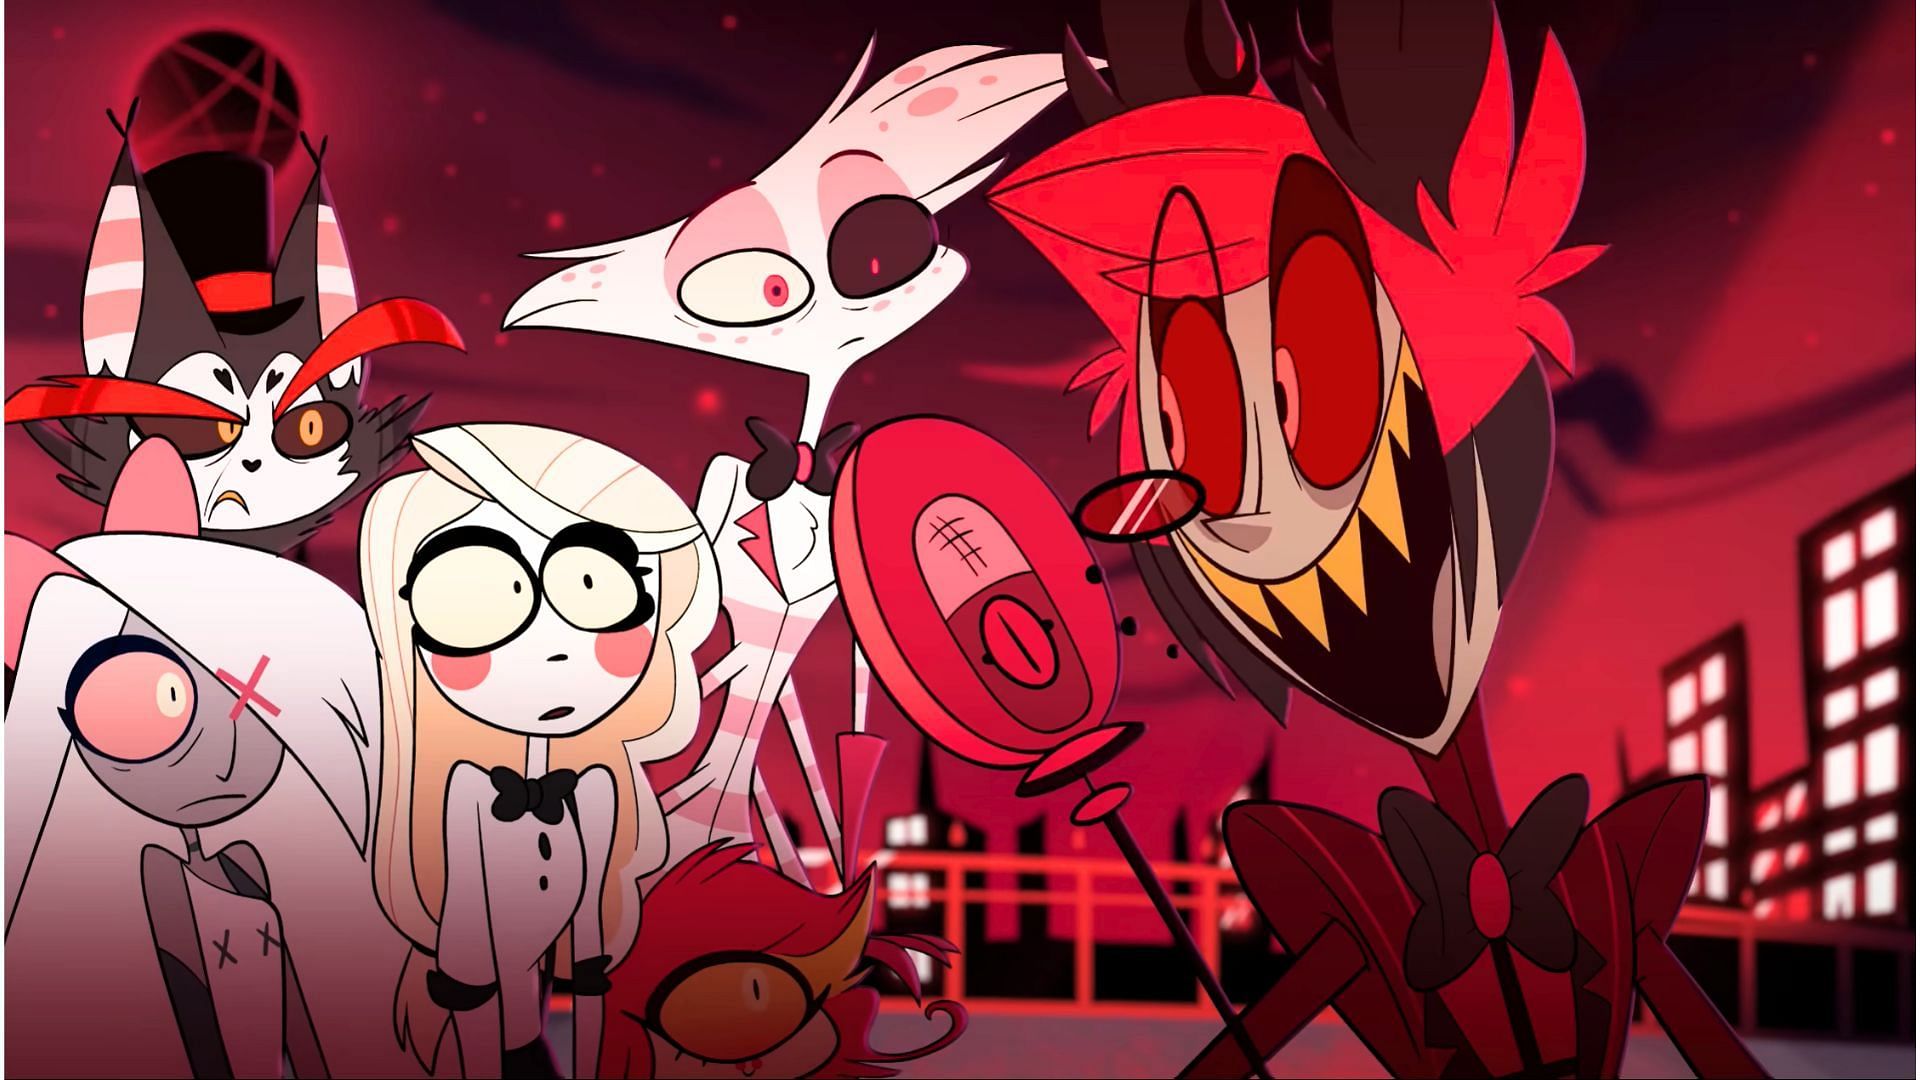 All episodes of Hazbin Hotel will be available on Prime Video (Image via Prime Video)